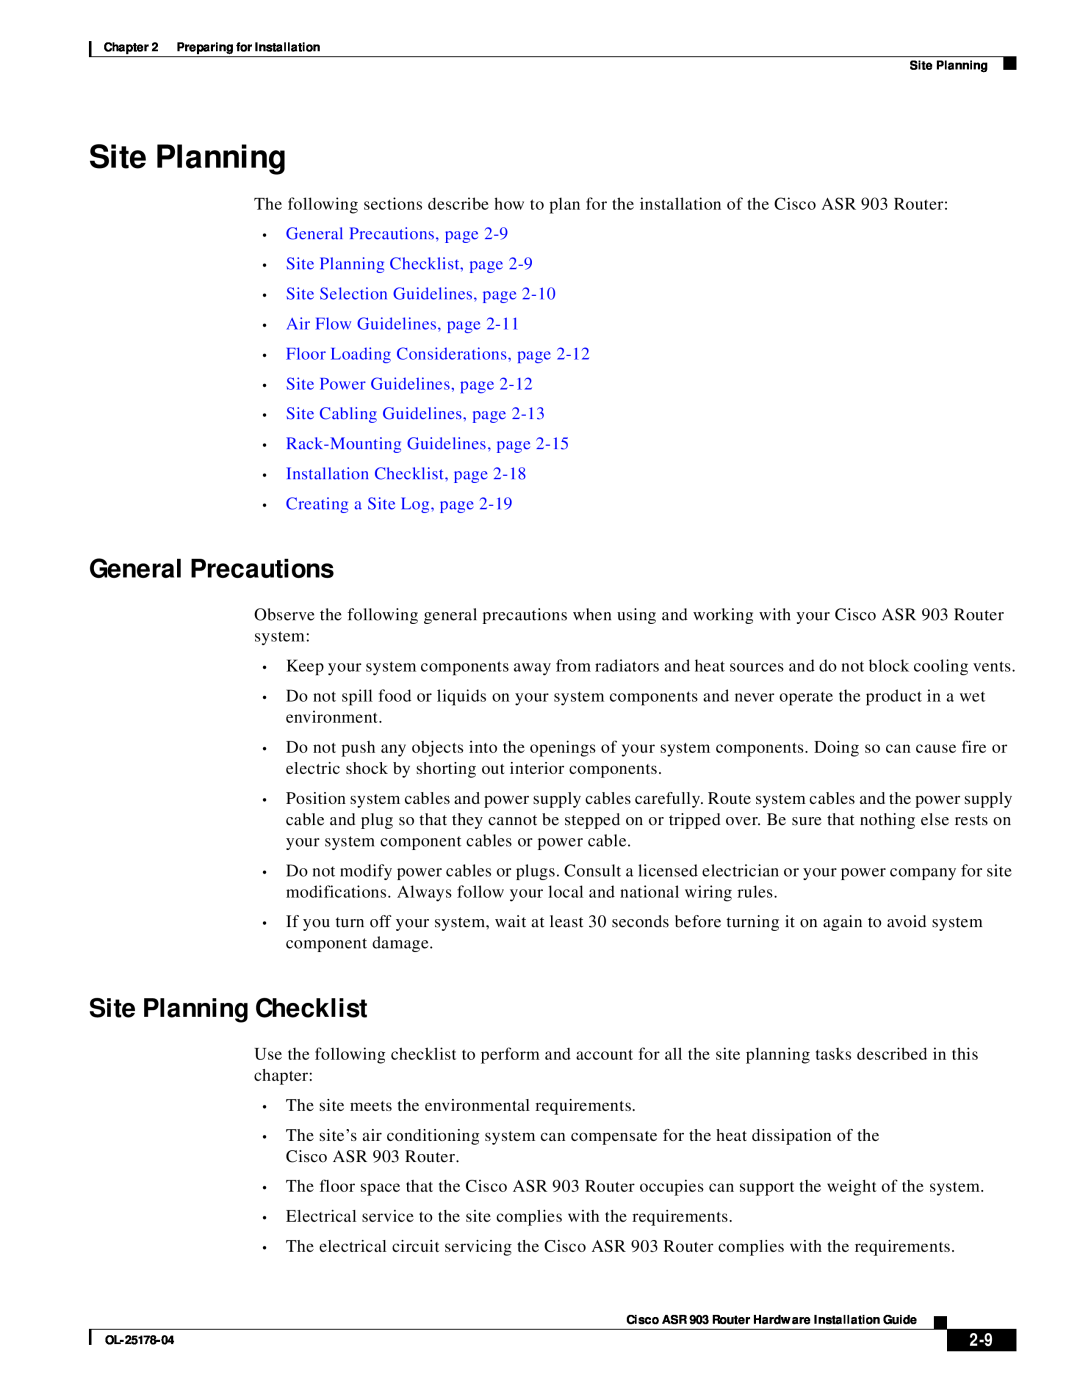 Cisco Systems 903 General Precautions, Site Planning Checklist, Installation Checklist, page Creating a Site Log, page 